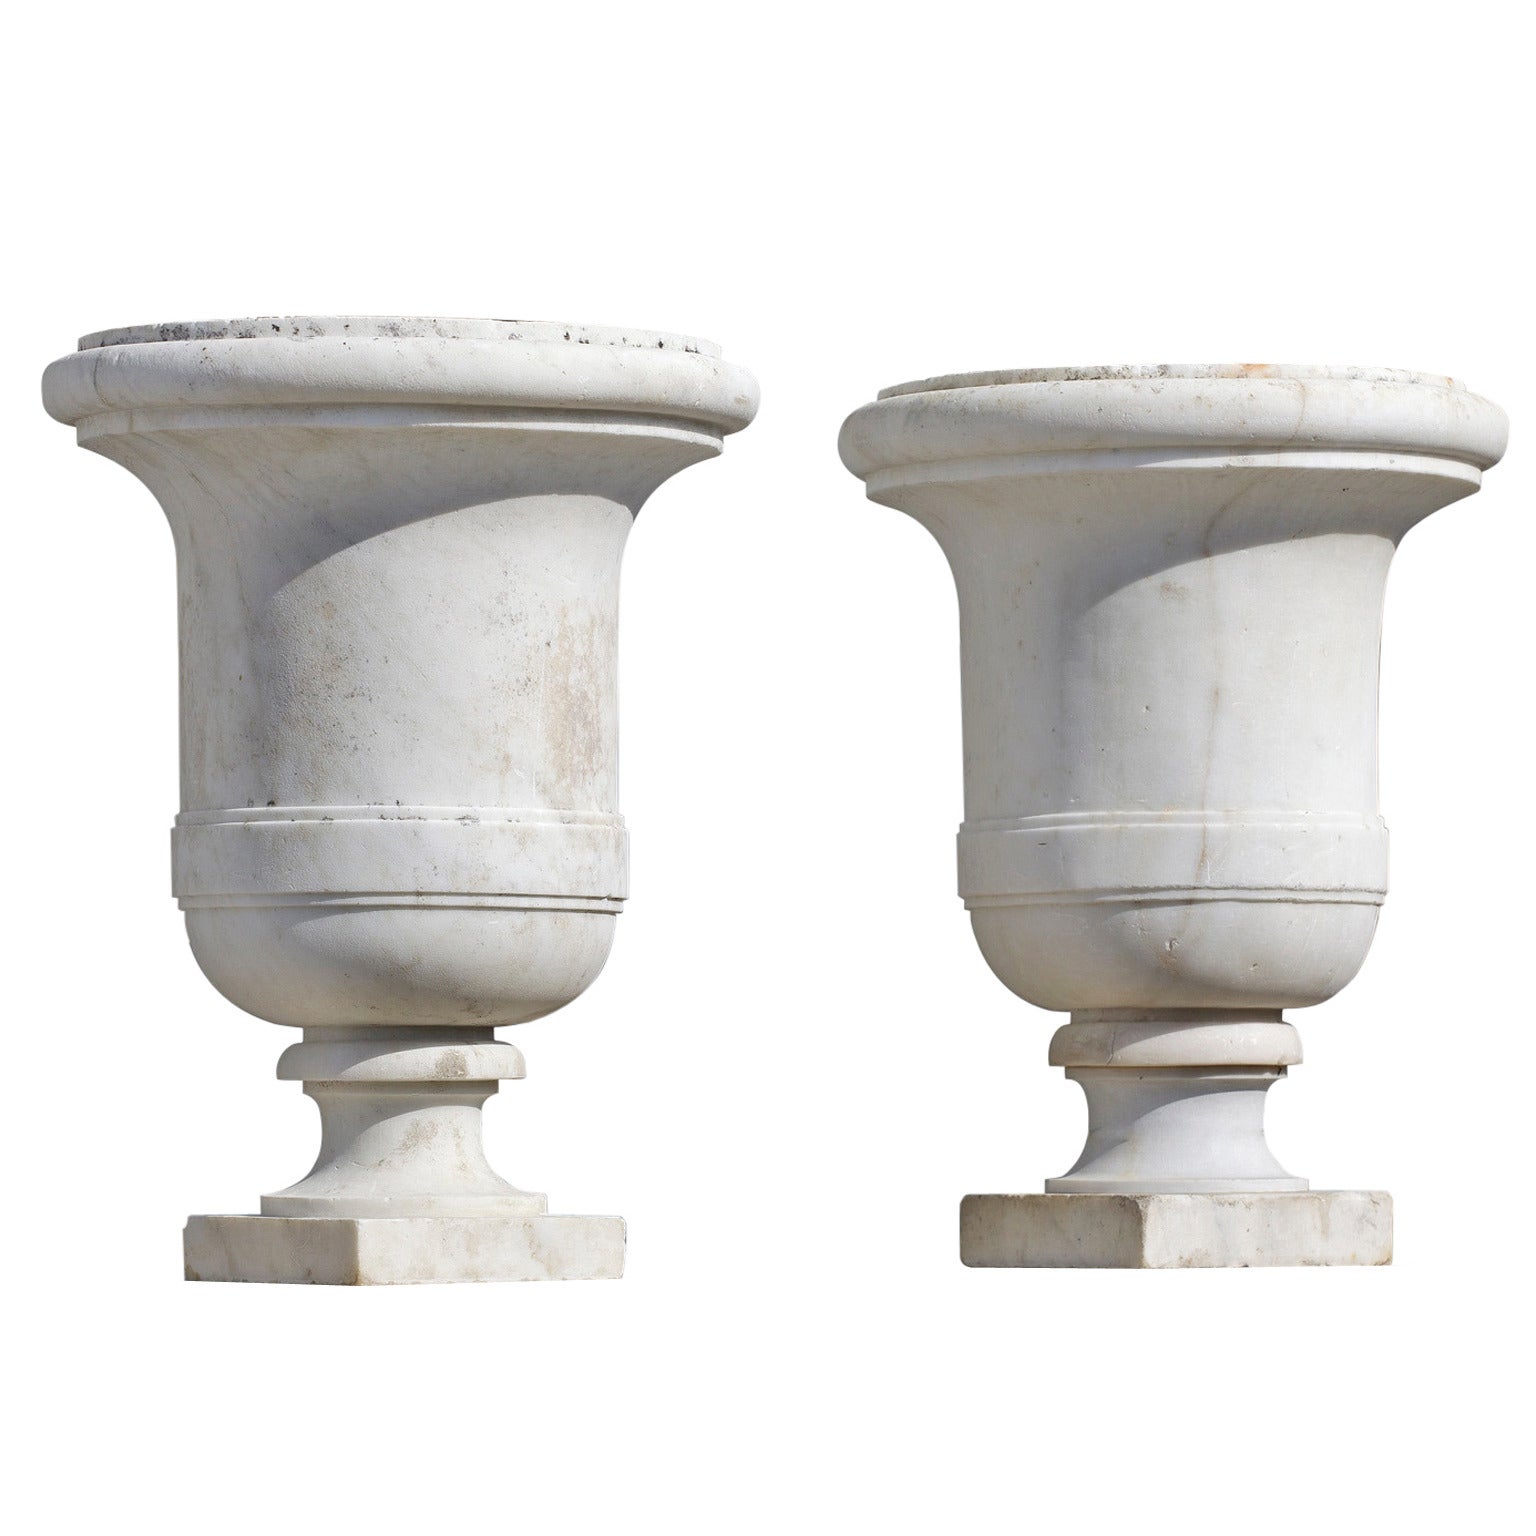 Pair of 19th Century Carved White Marble Garden Urns